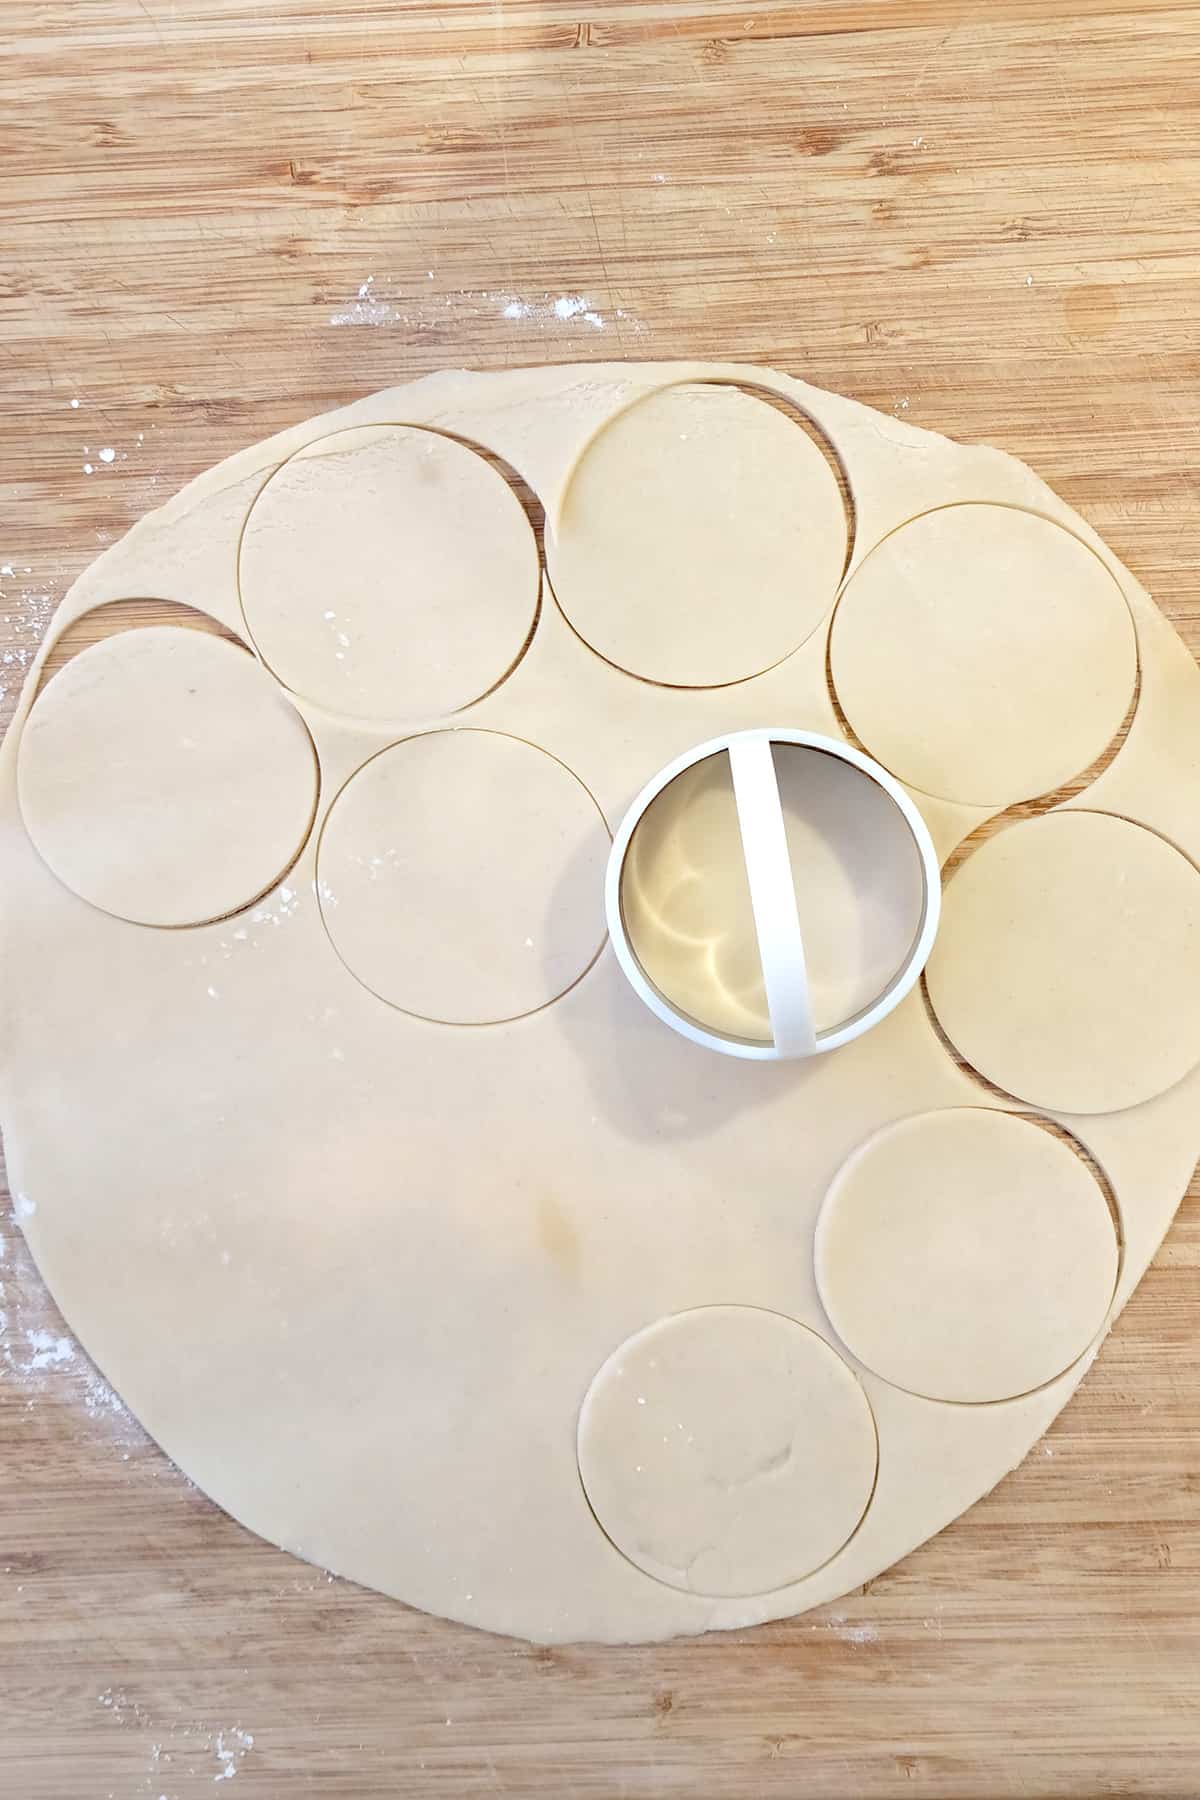 Cutting circles with a biscuit cutter.